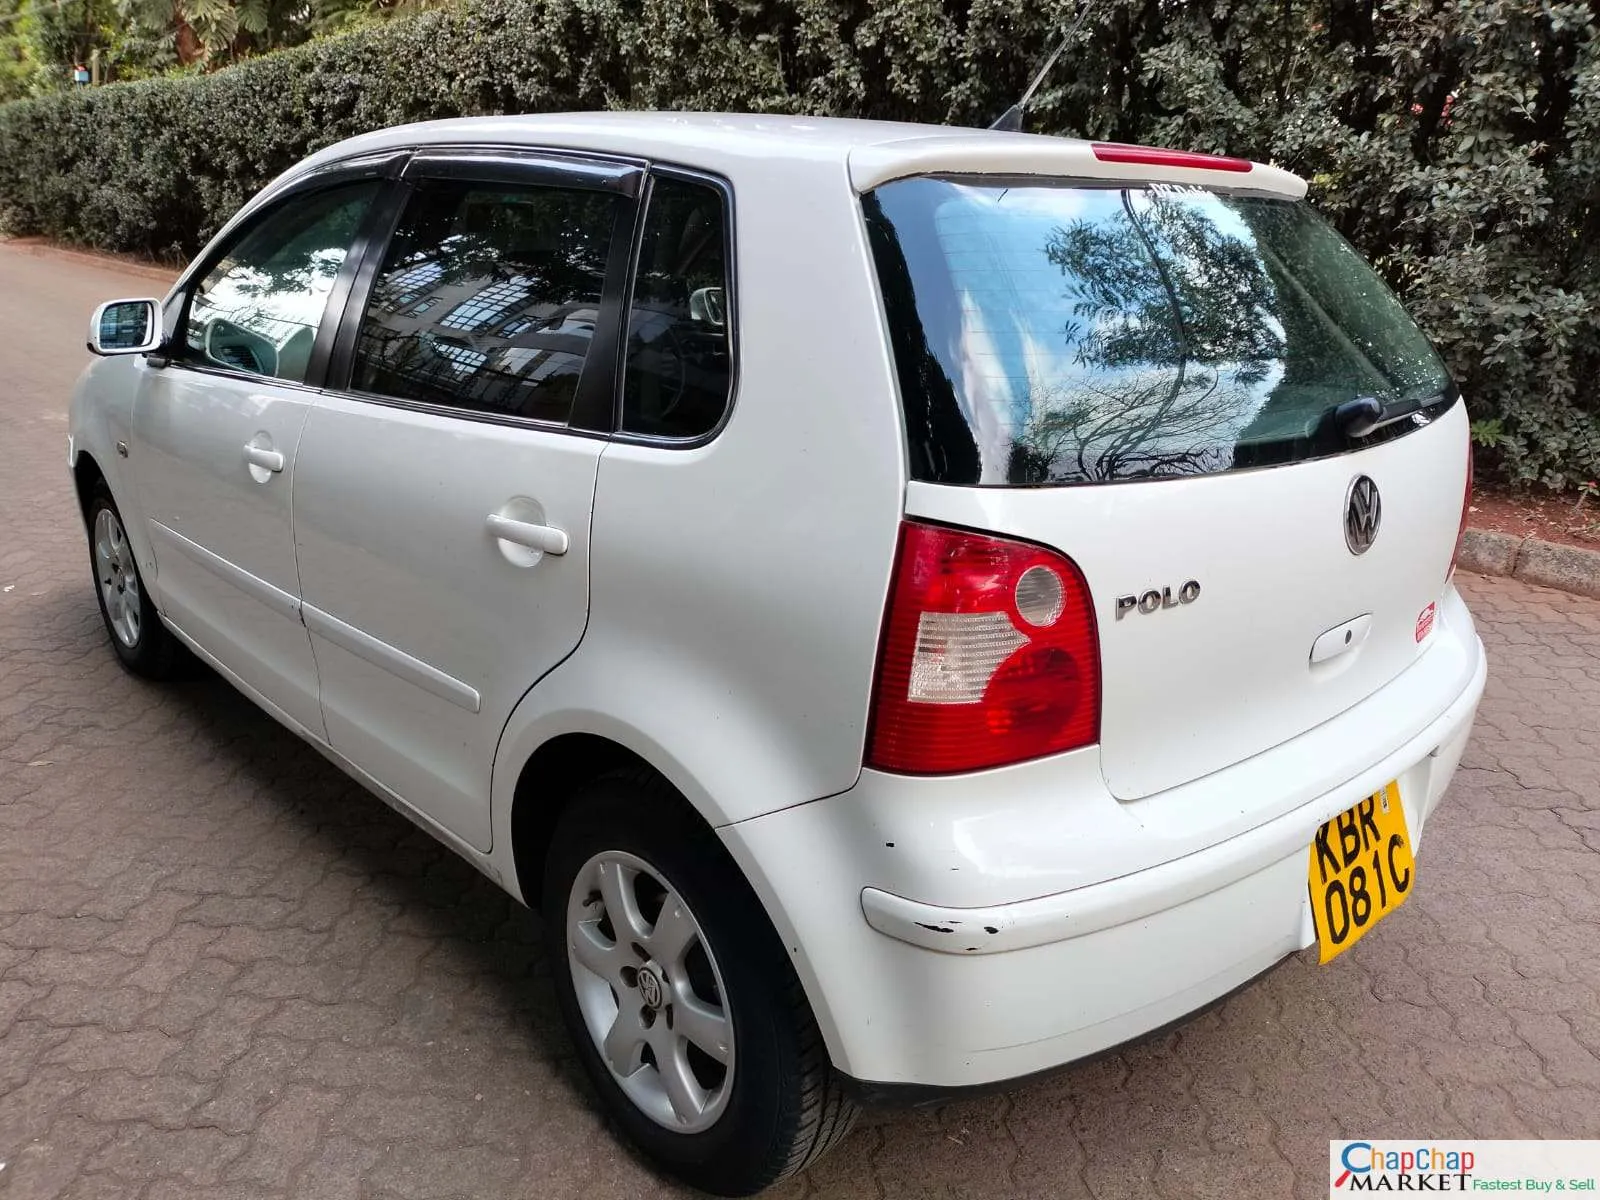 Volkswagen Polo for sale in Kenya QUICK SALE You Pay 30% Deposit Trade in Ok EXCLUSIVE (SOLD)